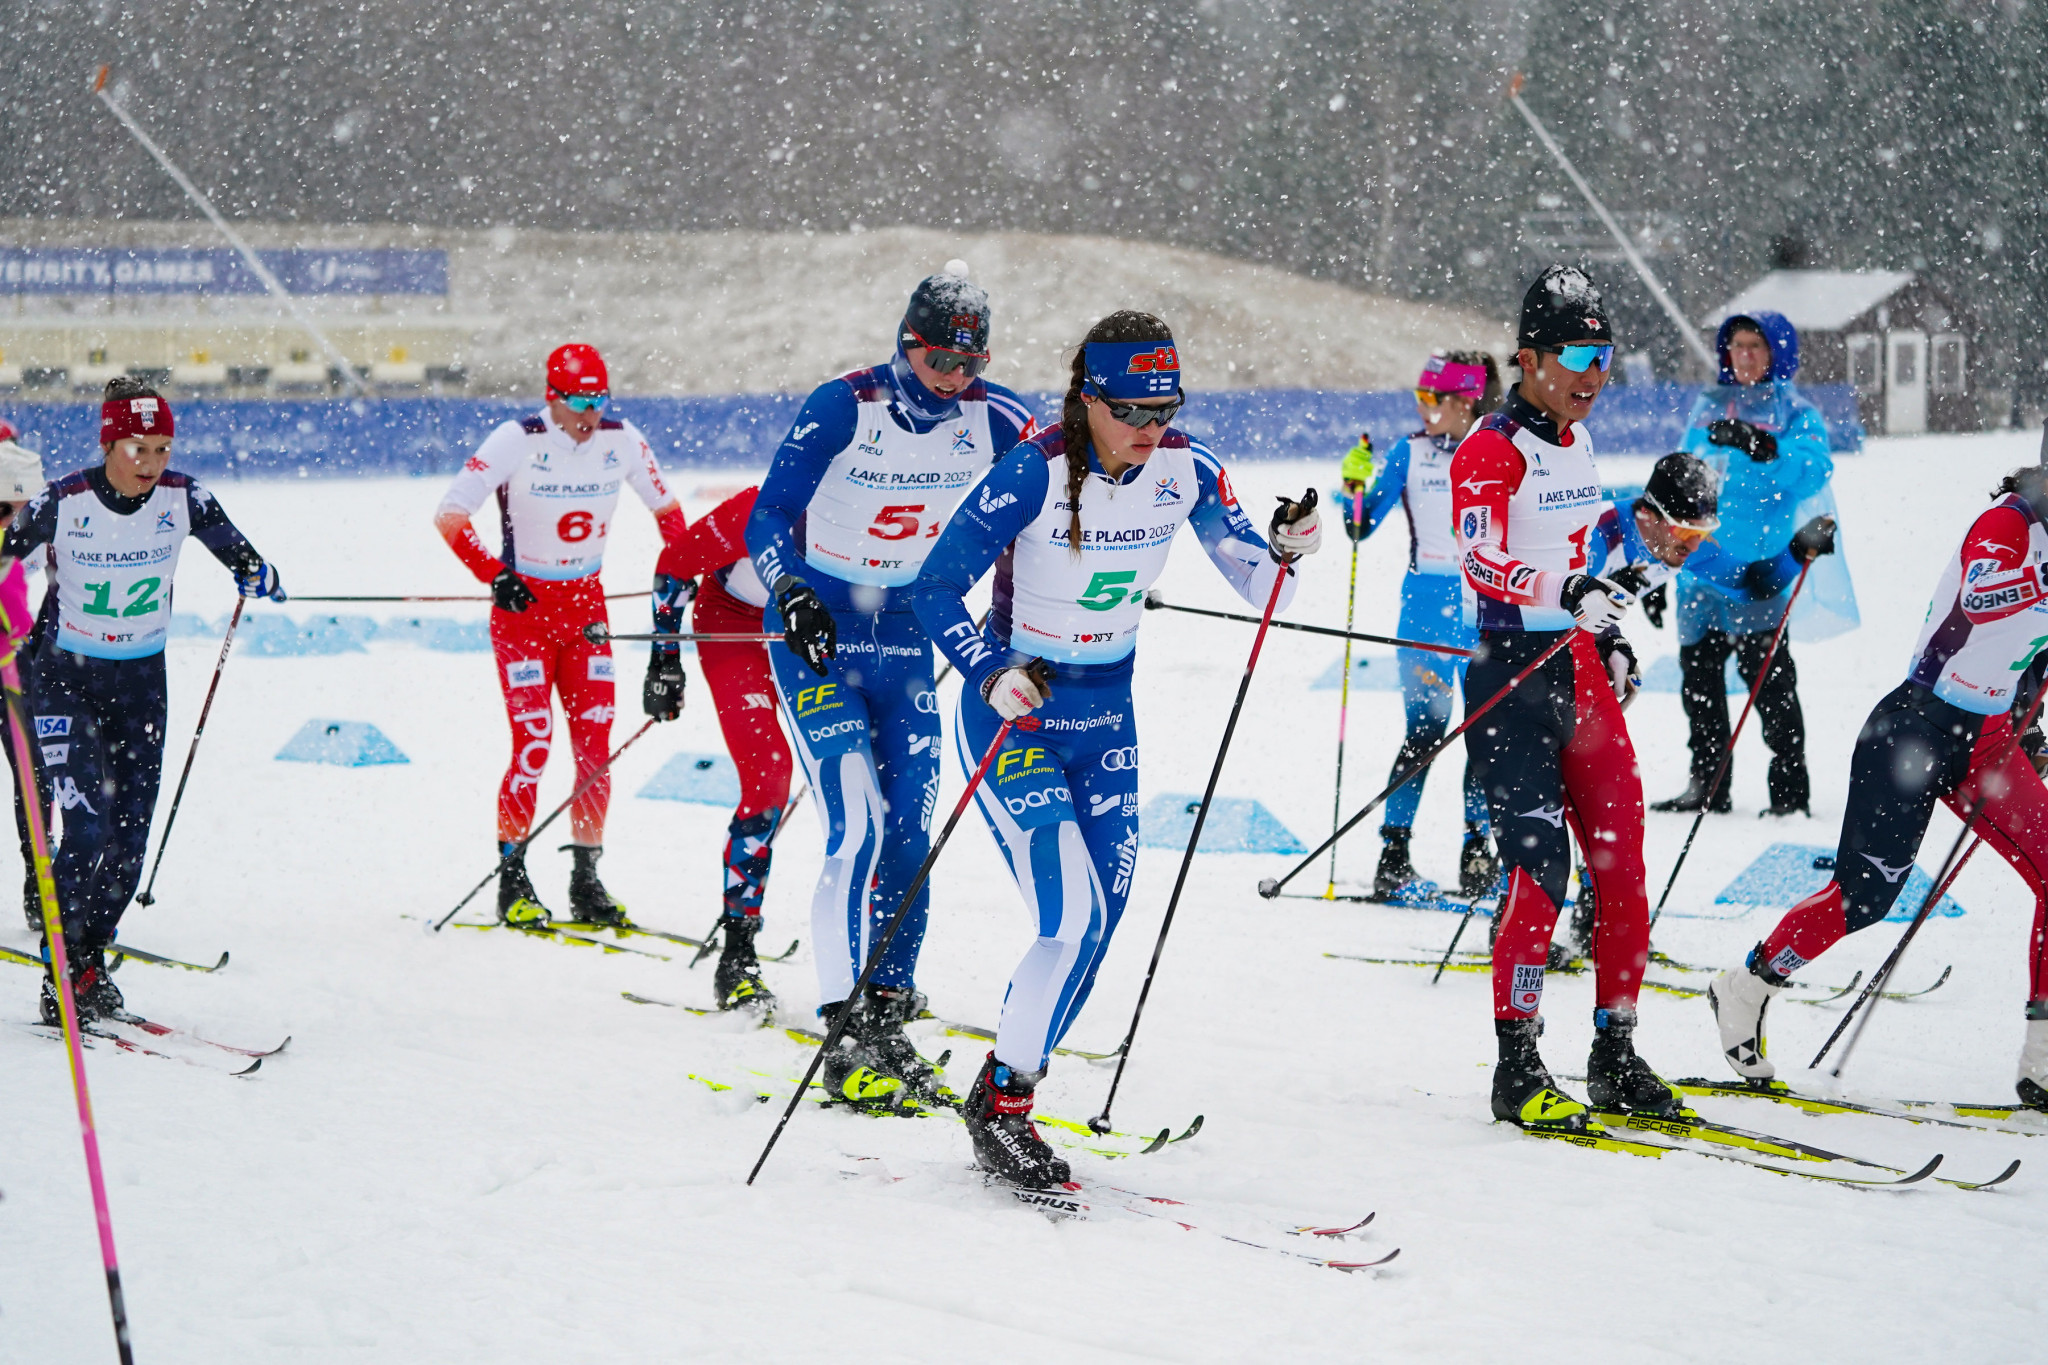 Athletes struggled early on at Mount Van Hoevenberg somewhat as the surface had turned to slush before relief was felt around the venue with a fresh snowfall ©FISU